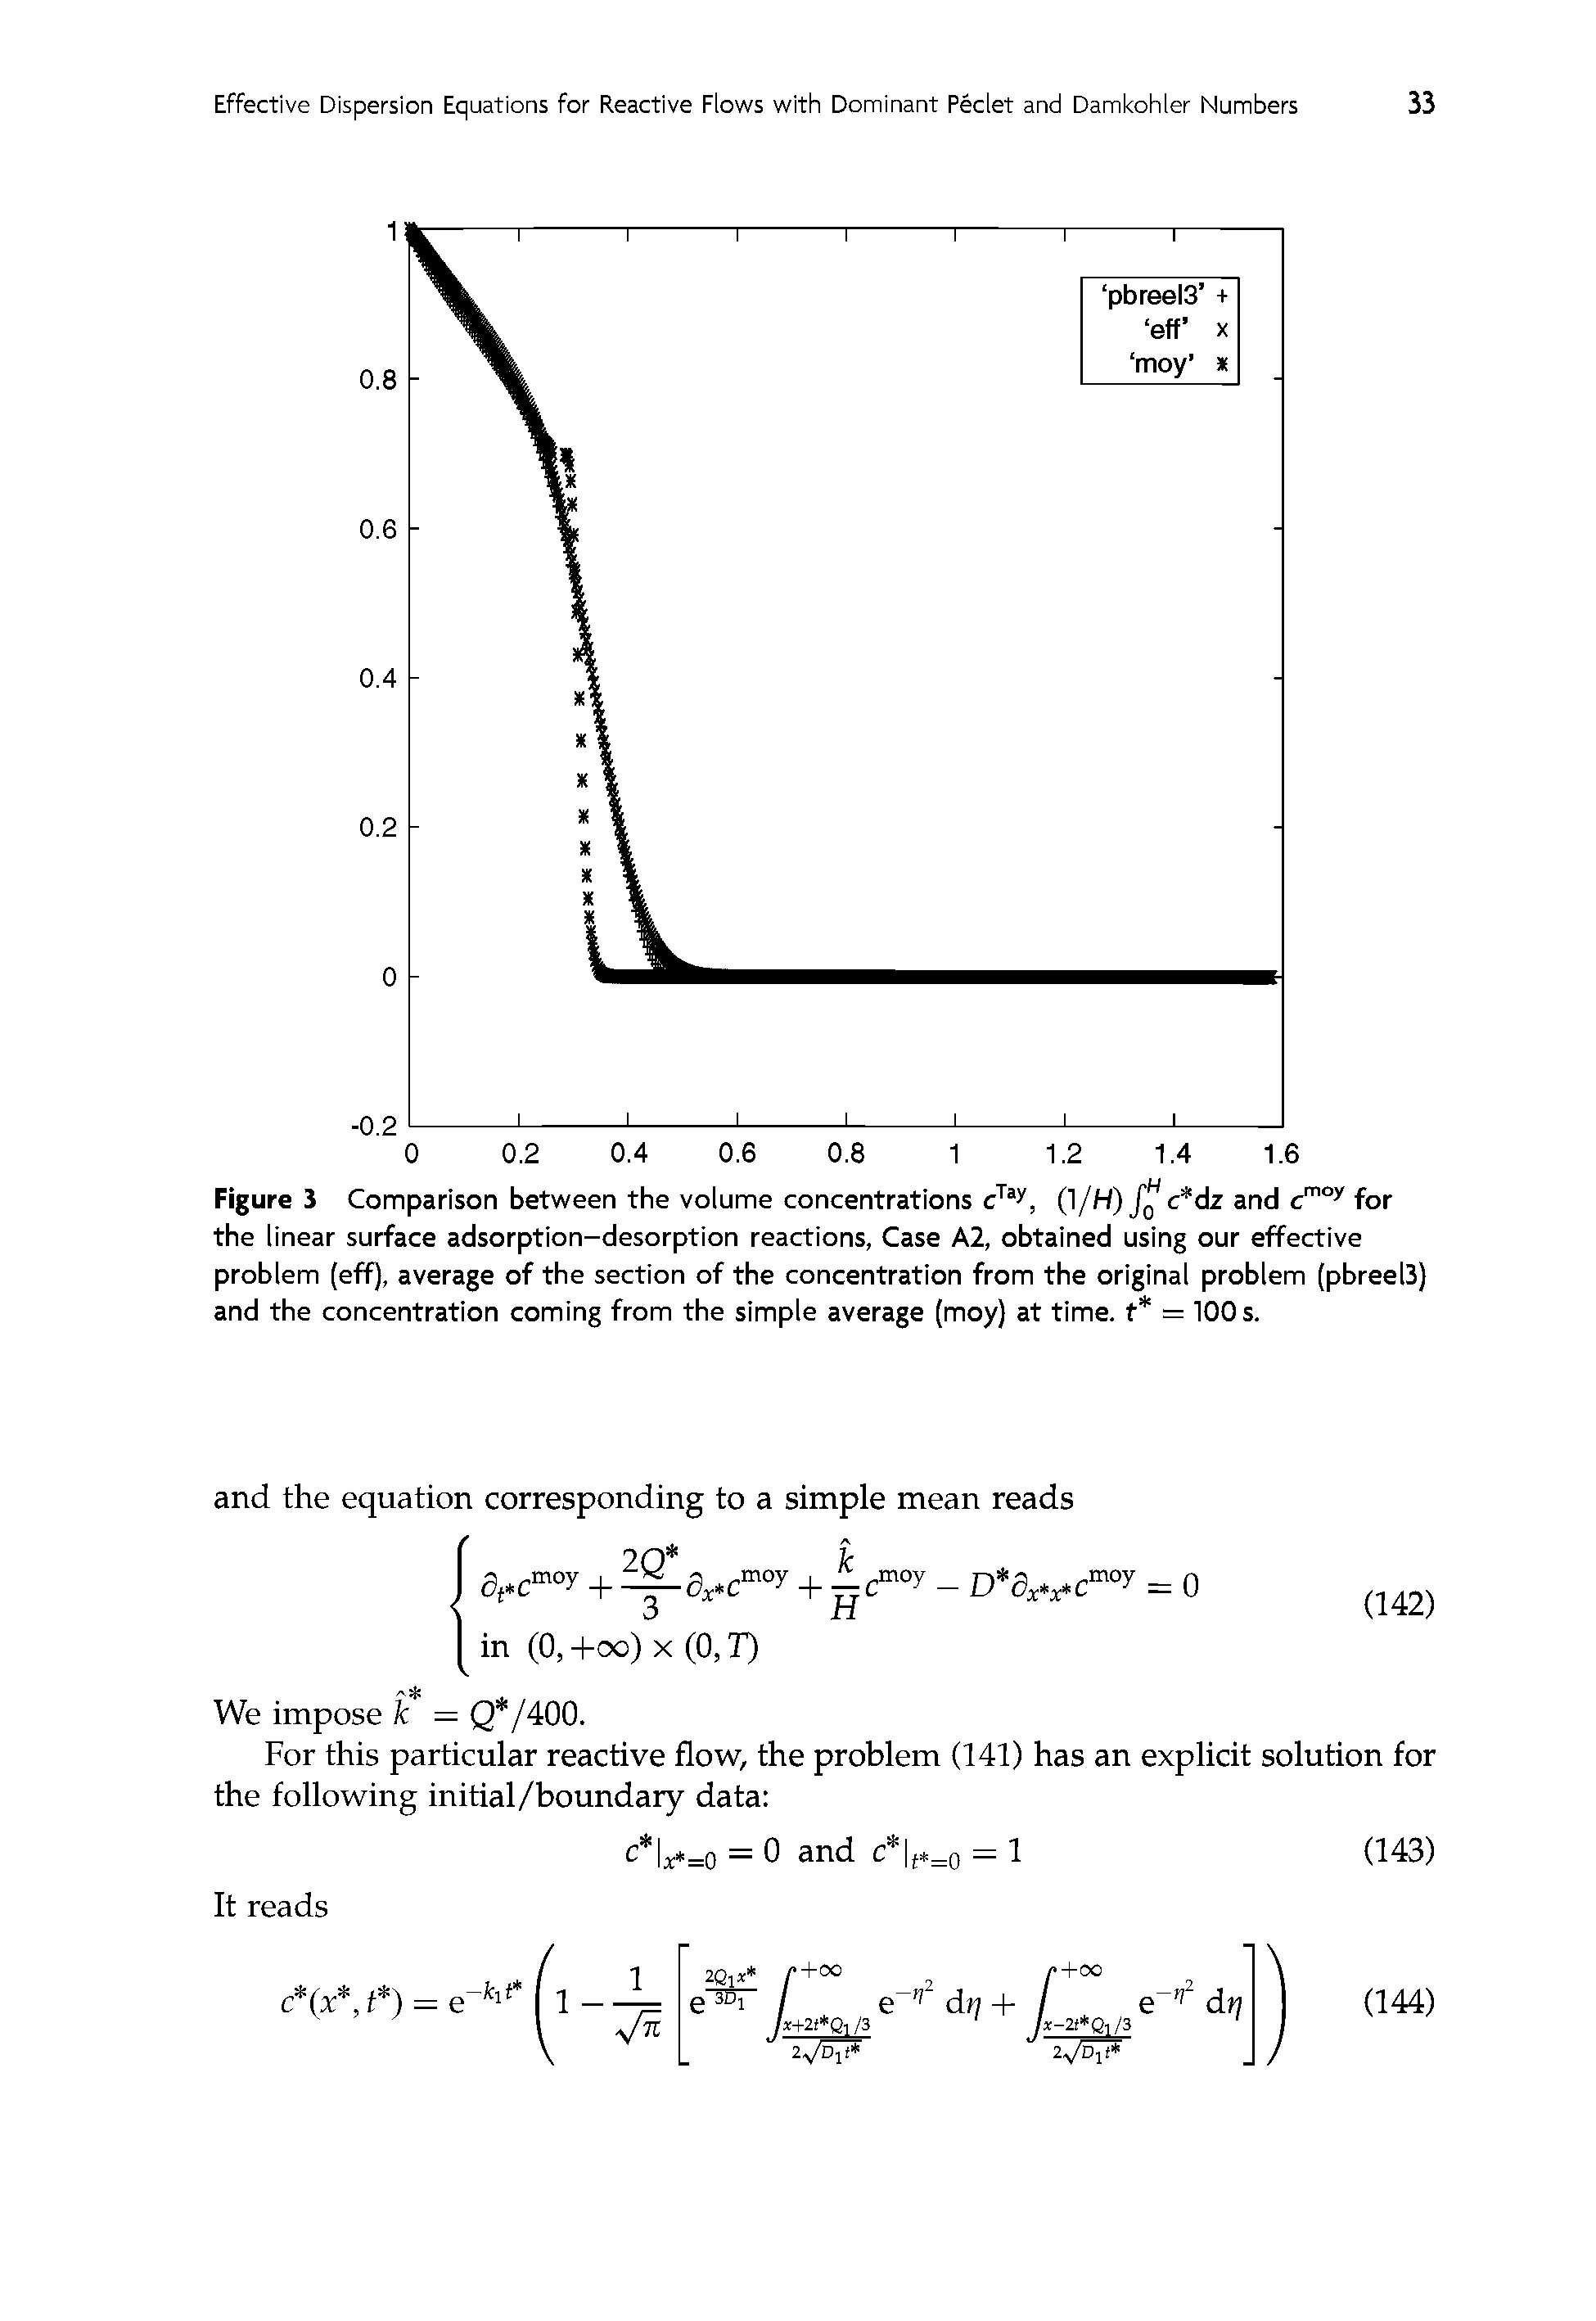 Figure 3 Comparison between the volume concentrations (1/H) c dz and for the linear surface adsorption-desorption reactions, Case A2, obtained using our effective problem (eff), average of the section of the concentration from the original problem (pbreeB) and the concentration coming from the simple average (moy) at time, t = 100 s.